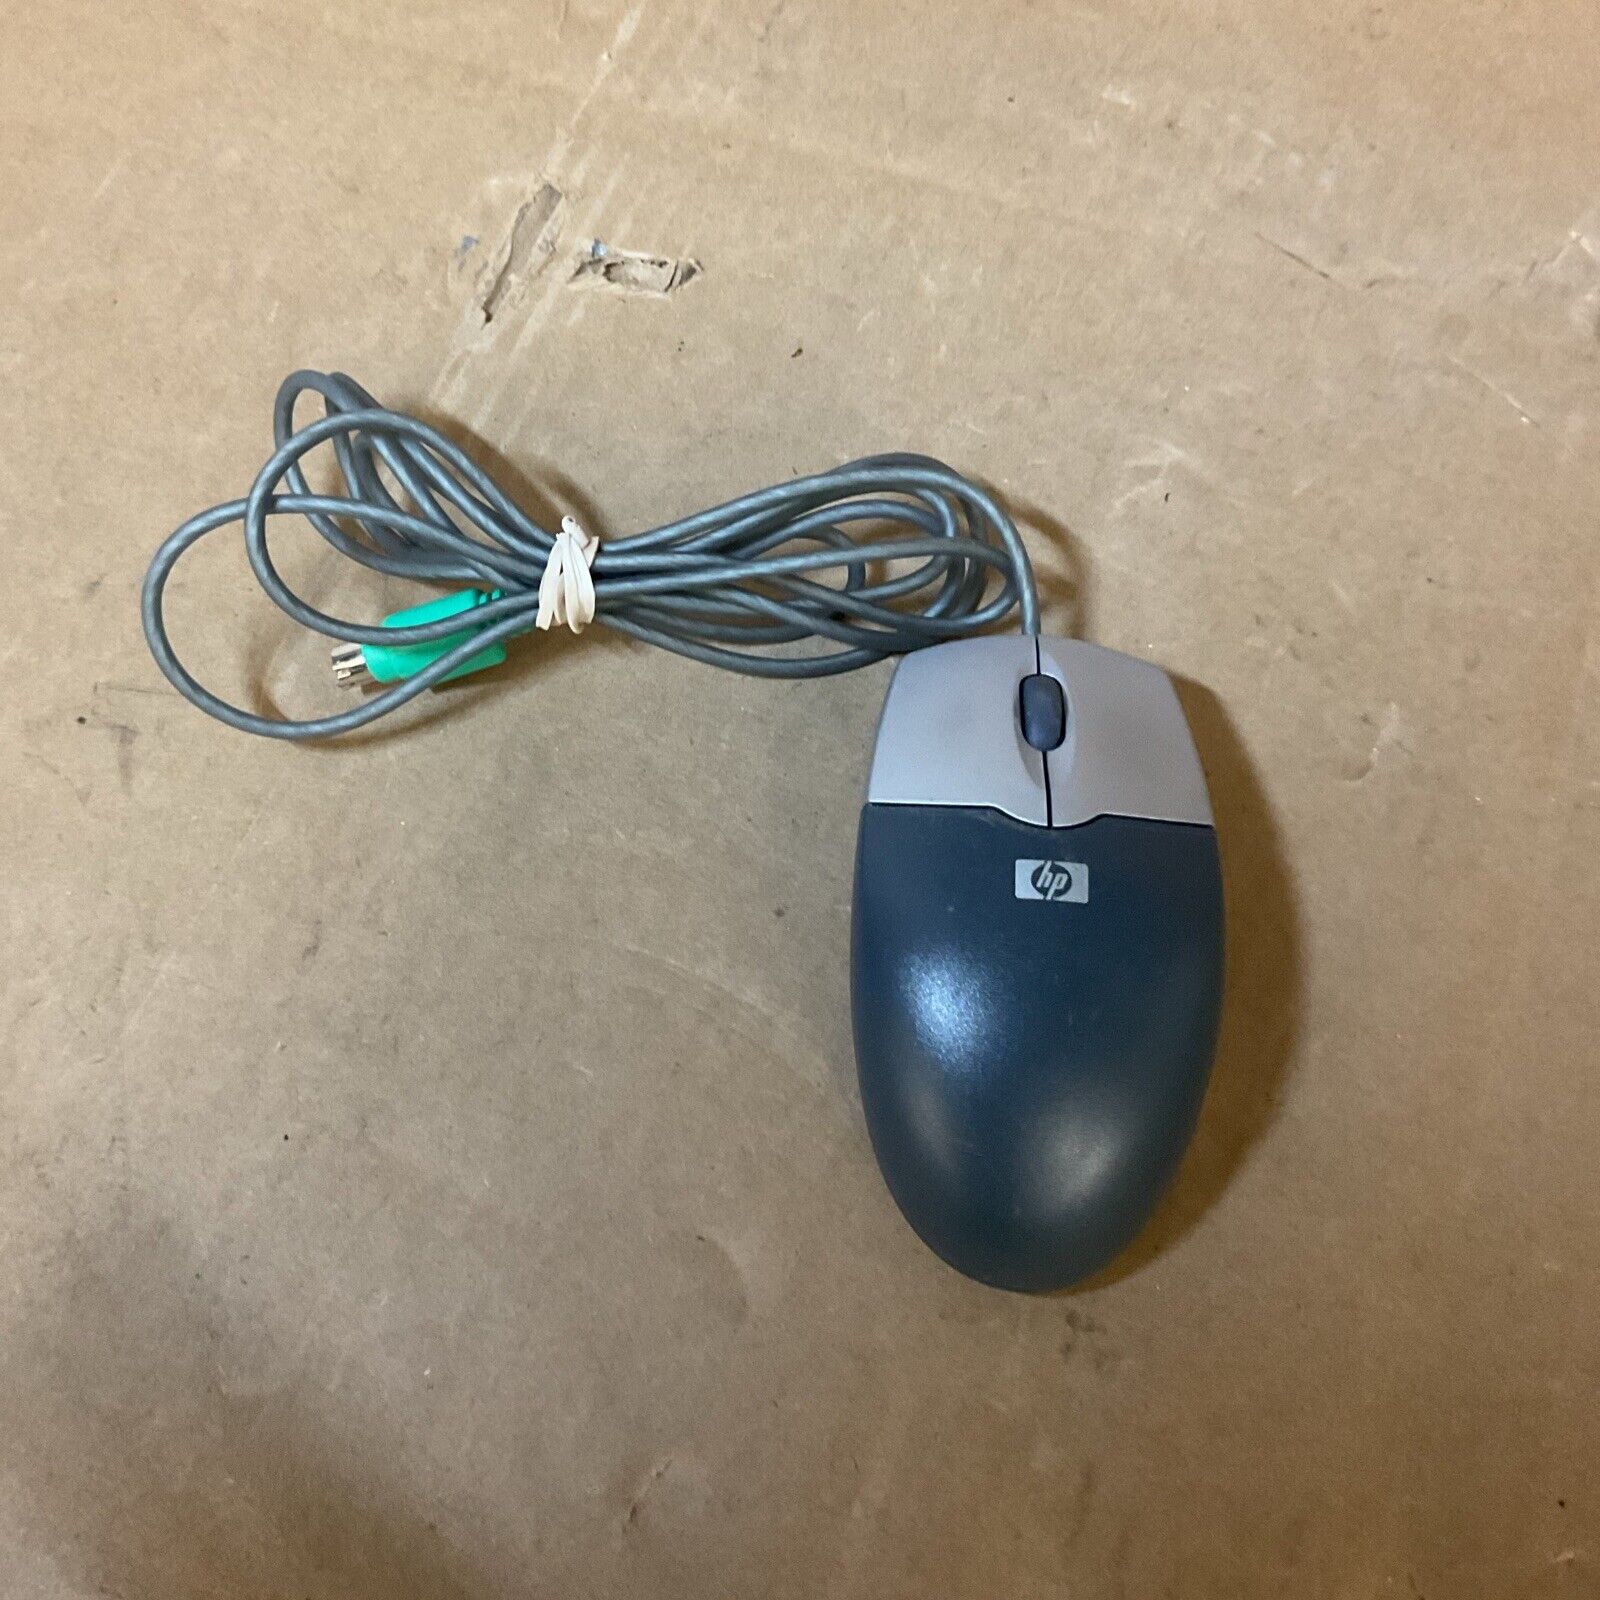 HP PS2 Ball Mouse 5187-2149 Vintage Wheel